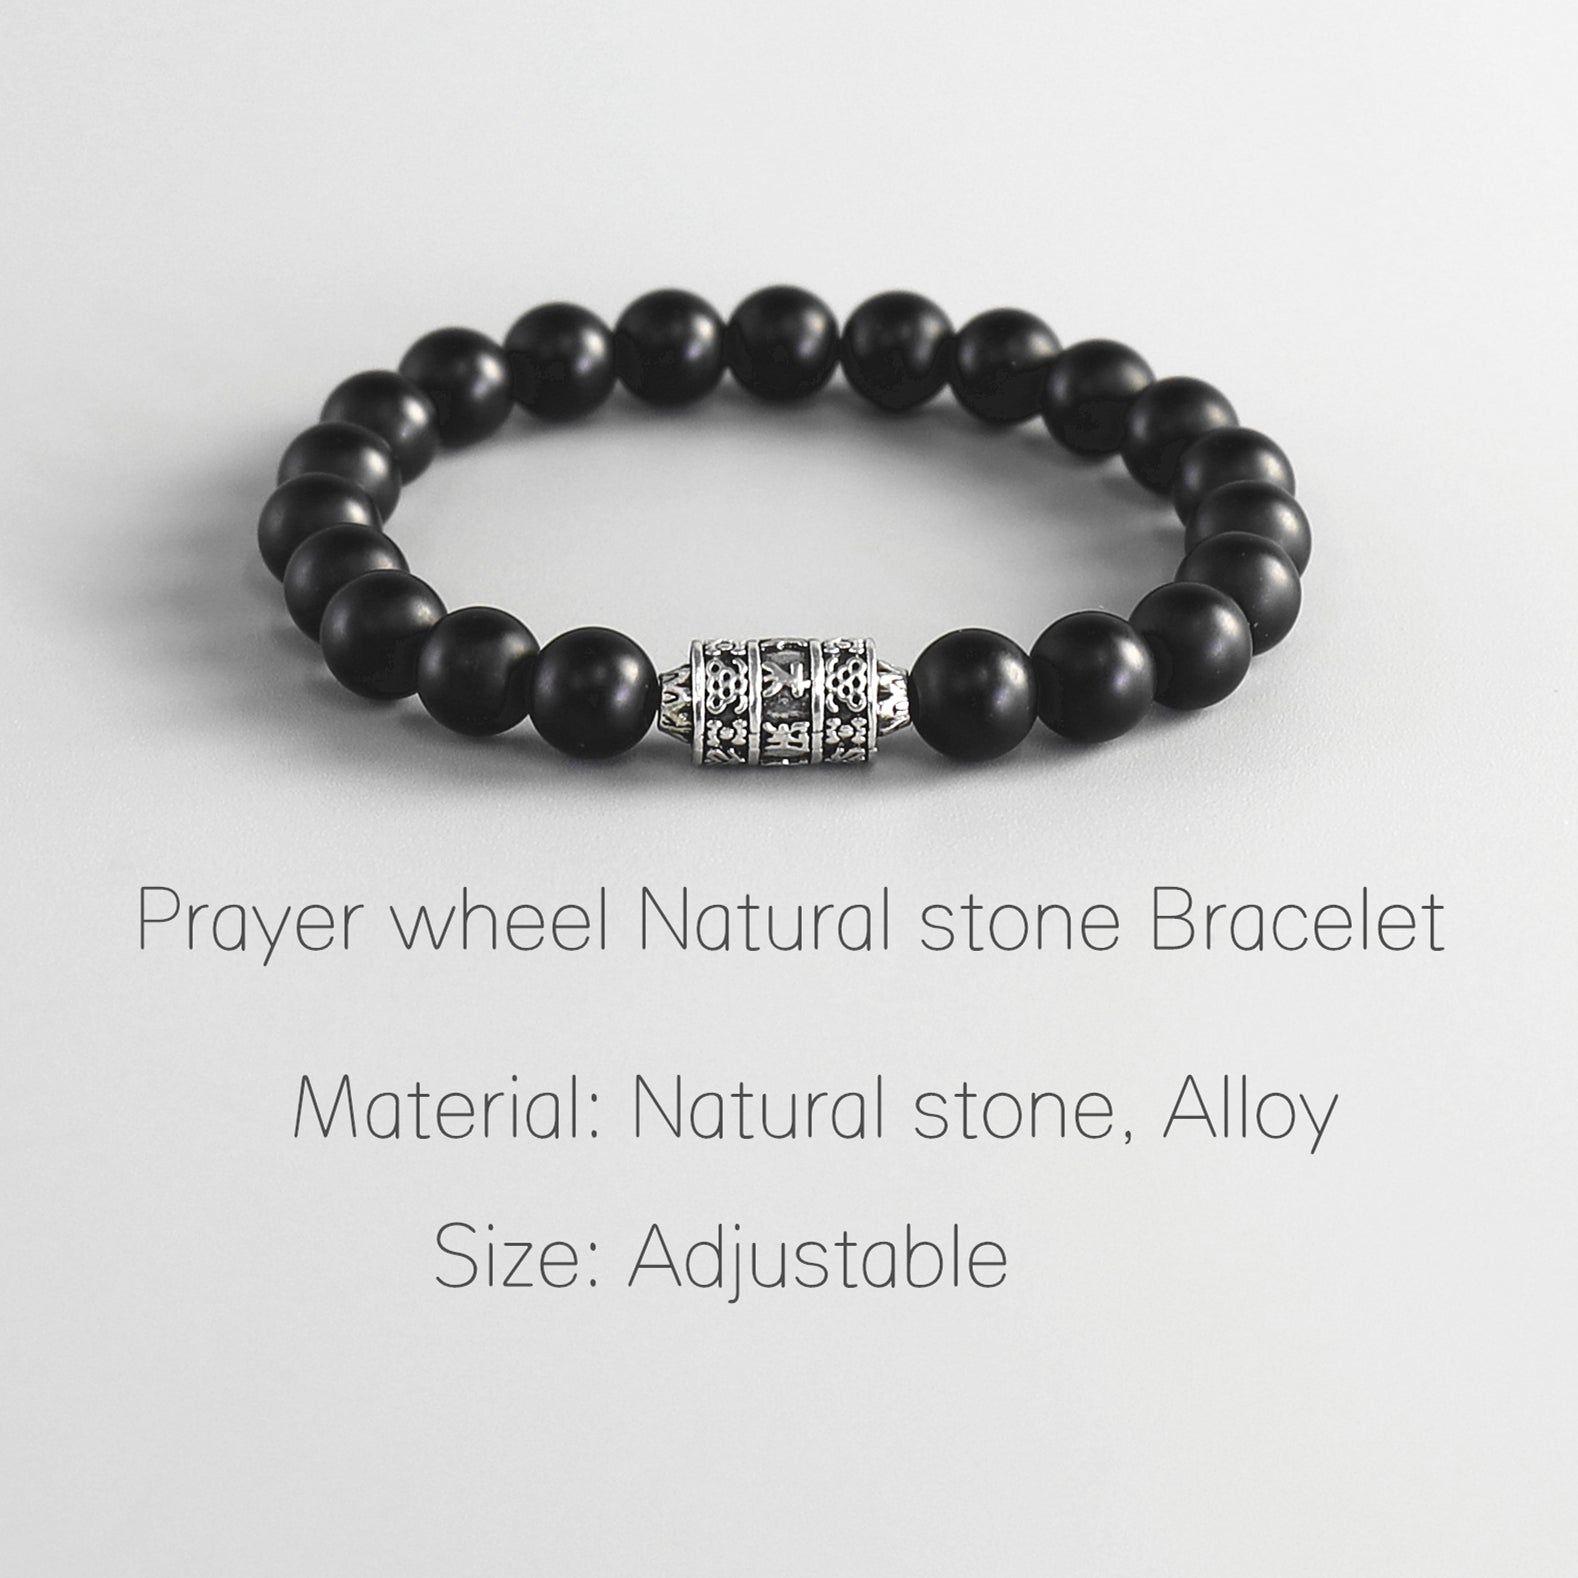 Buddhist Handcrafted Nature Sandalwood Bracelet for "Protection & Courage" - with Prayer Wheel & Healing Black Bead Onyx